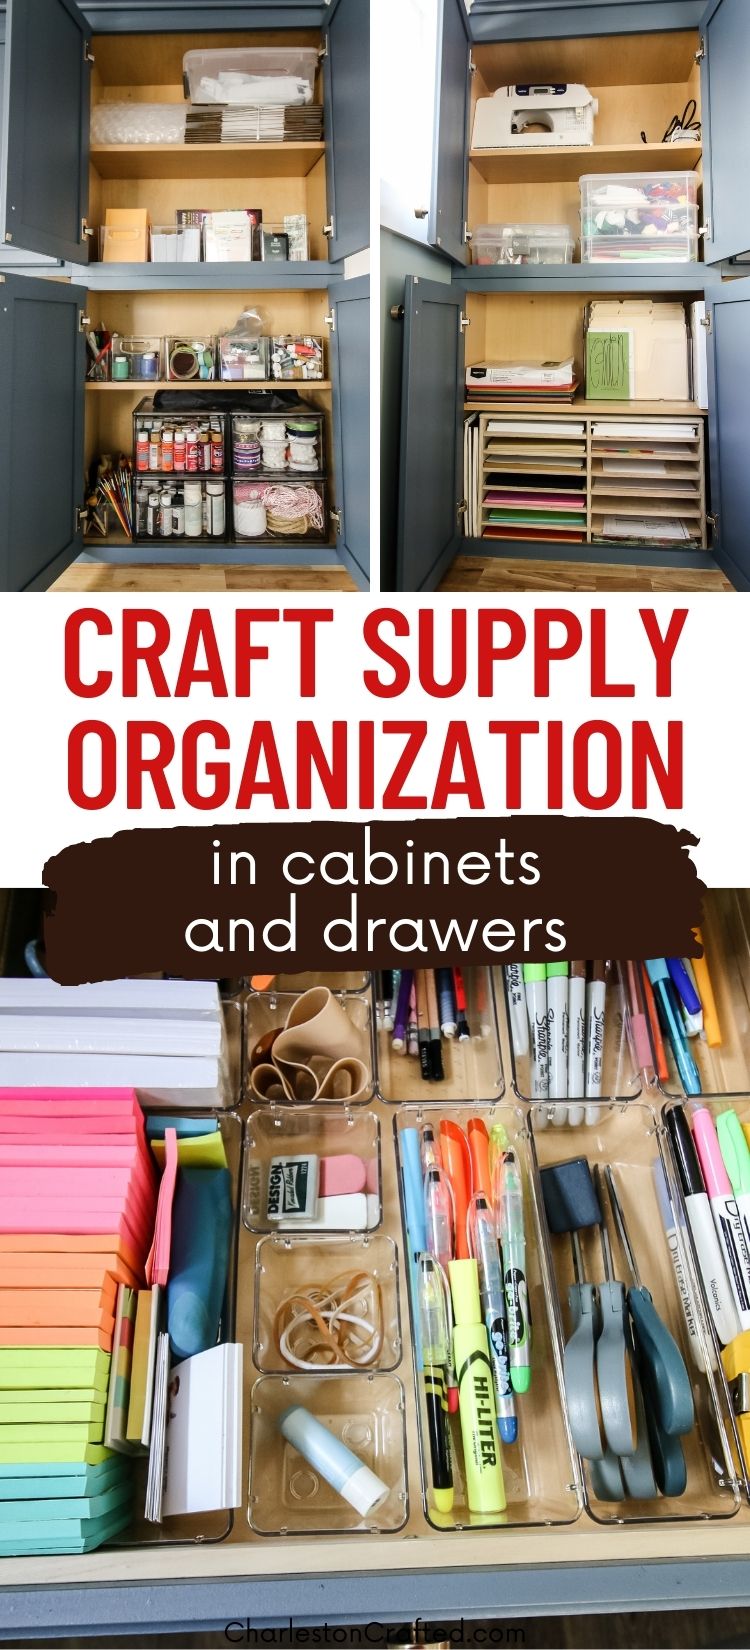 Kraftic Arts & Crafts Supply Center Complete with 20 Filled Drawers of Craft Materials